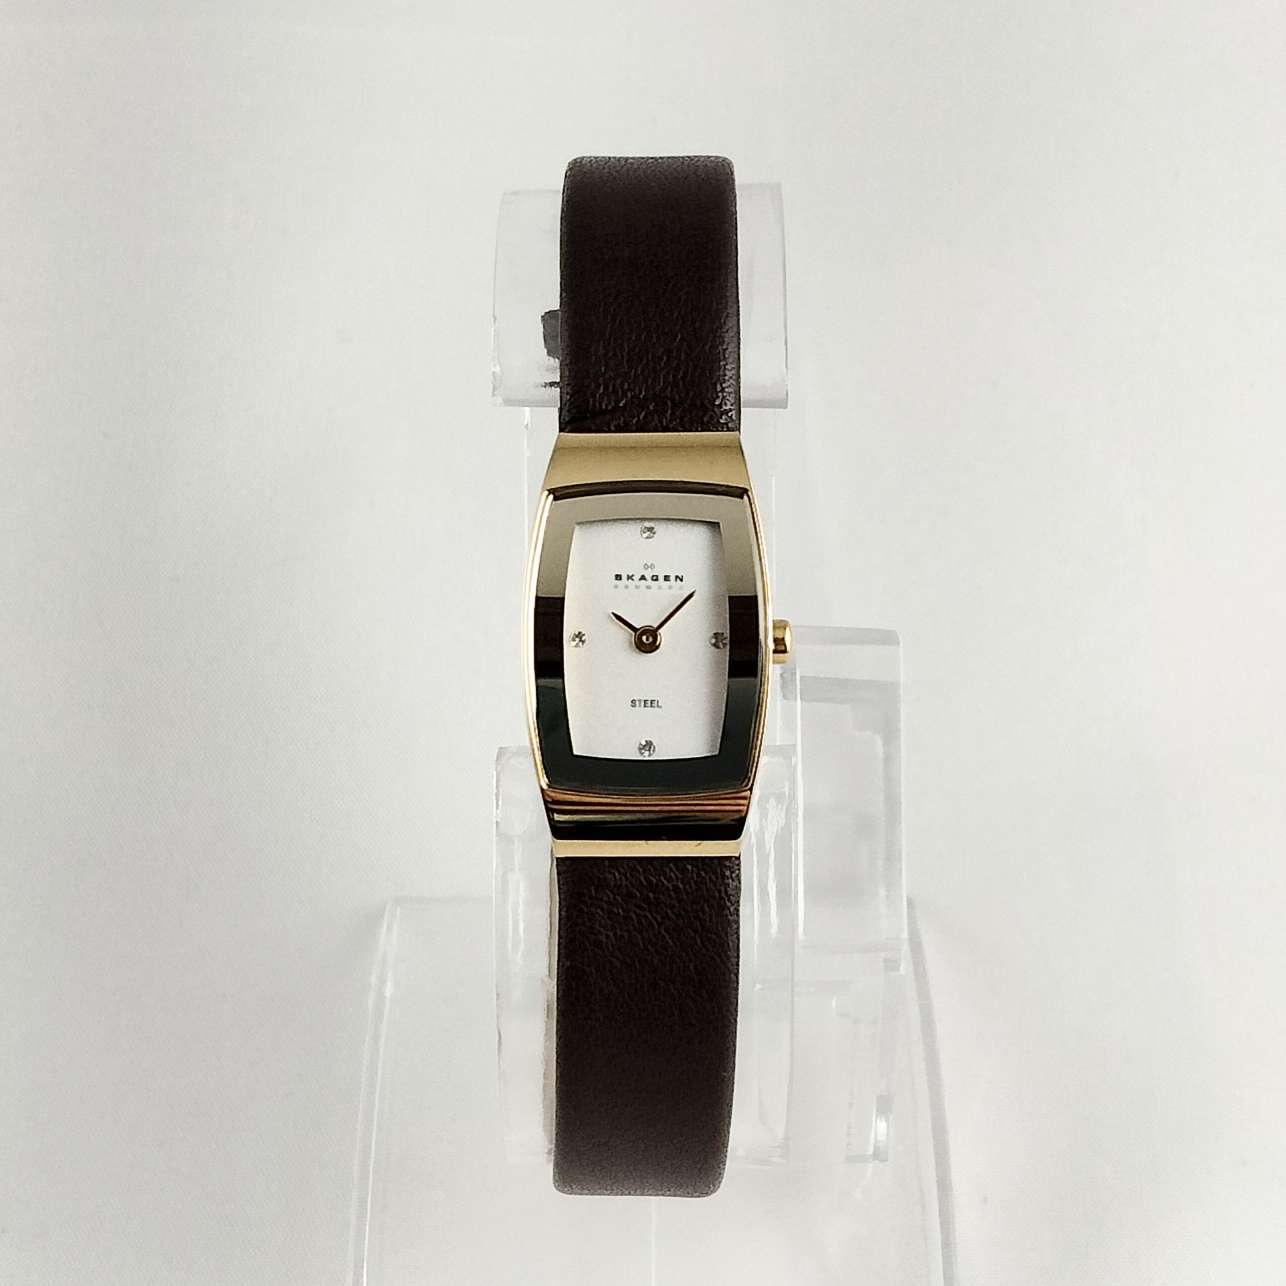 Skagen Petite Watch, Jewel and Gold Tone Details, Brown Genuine Leather Strap